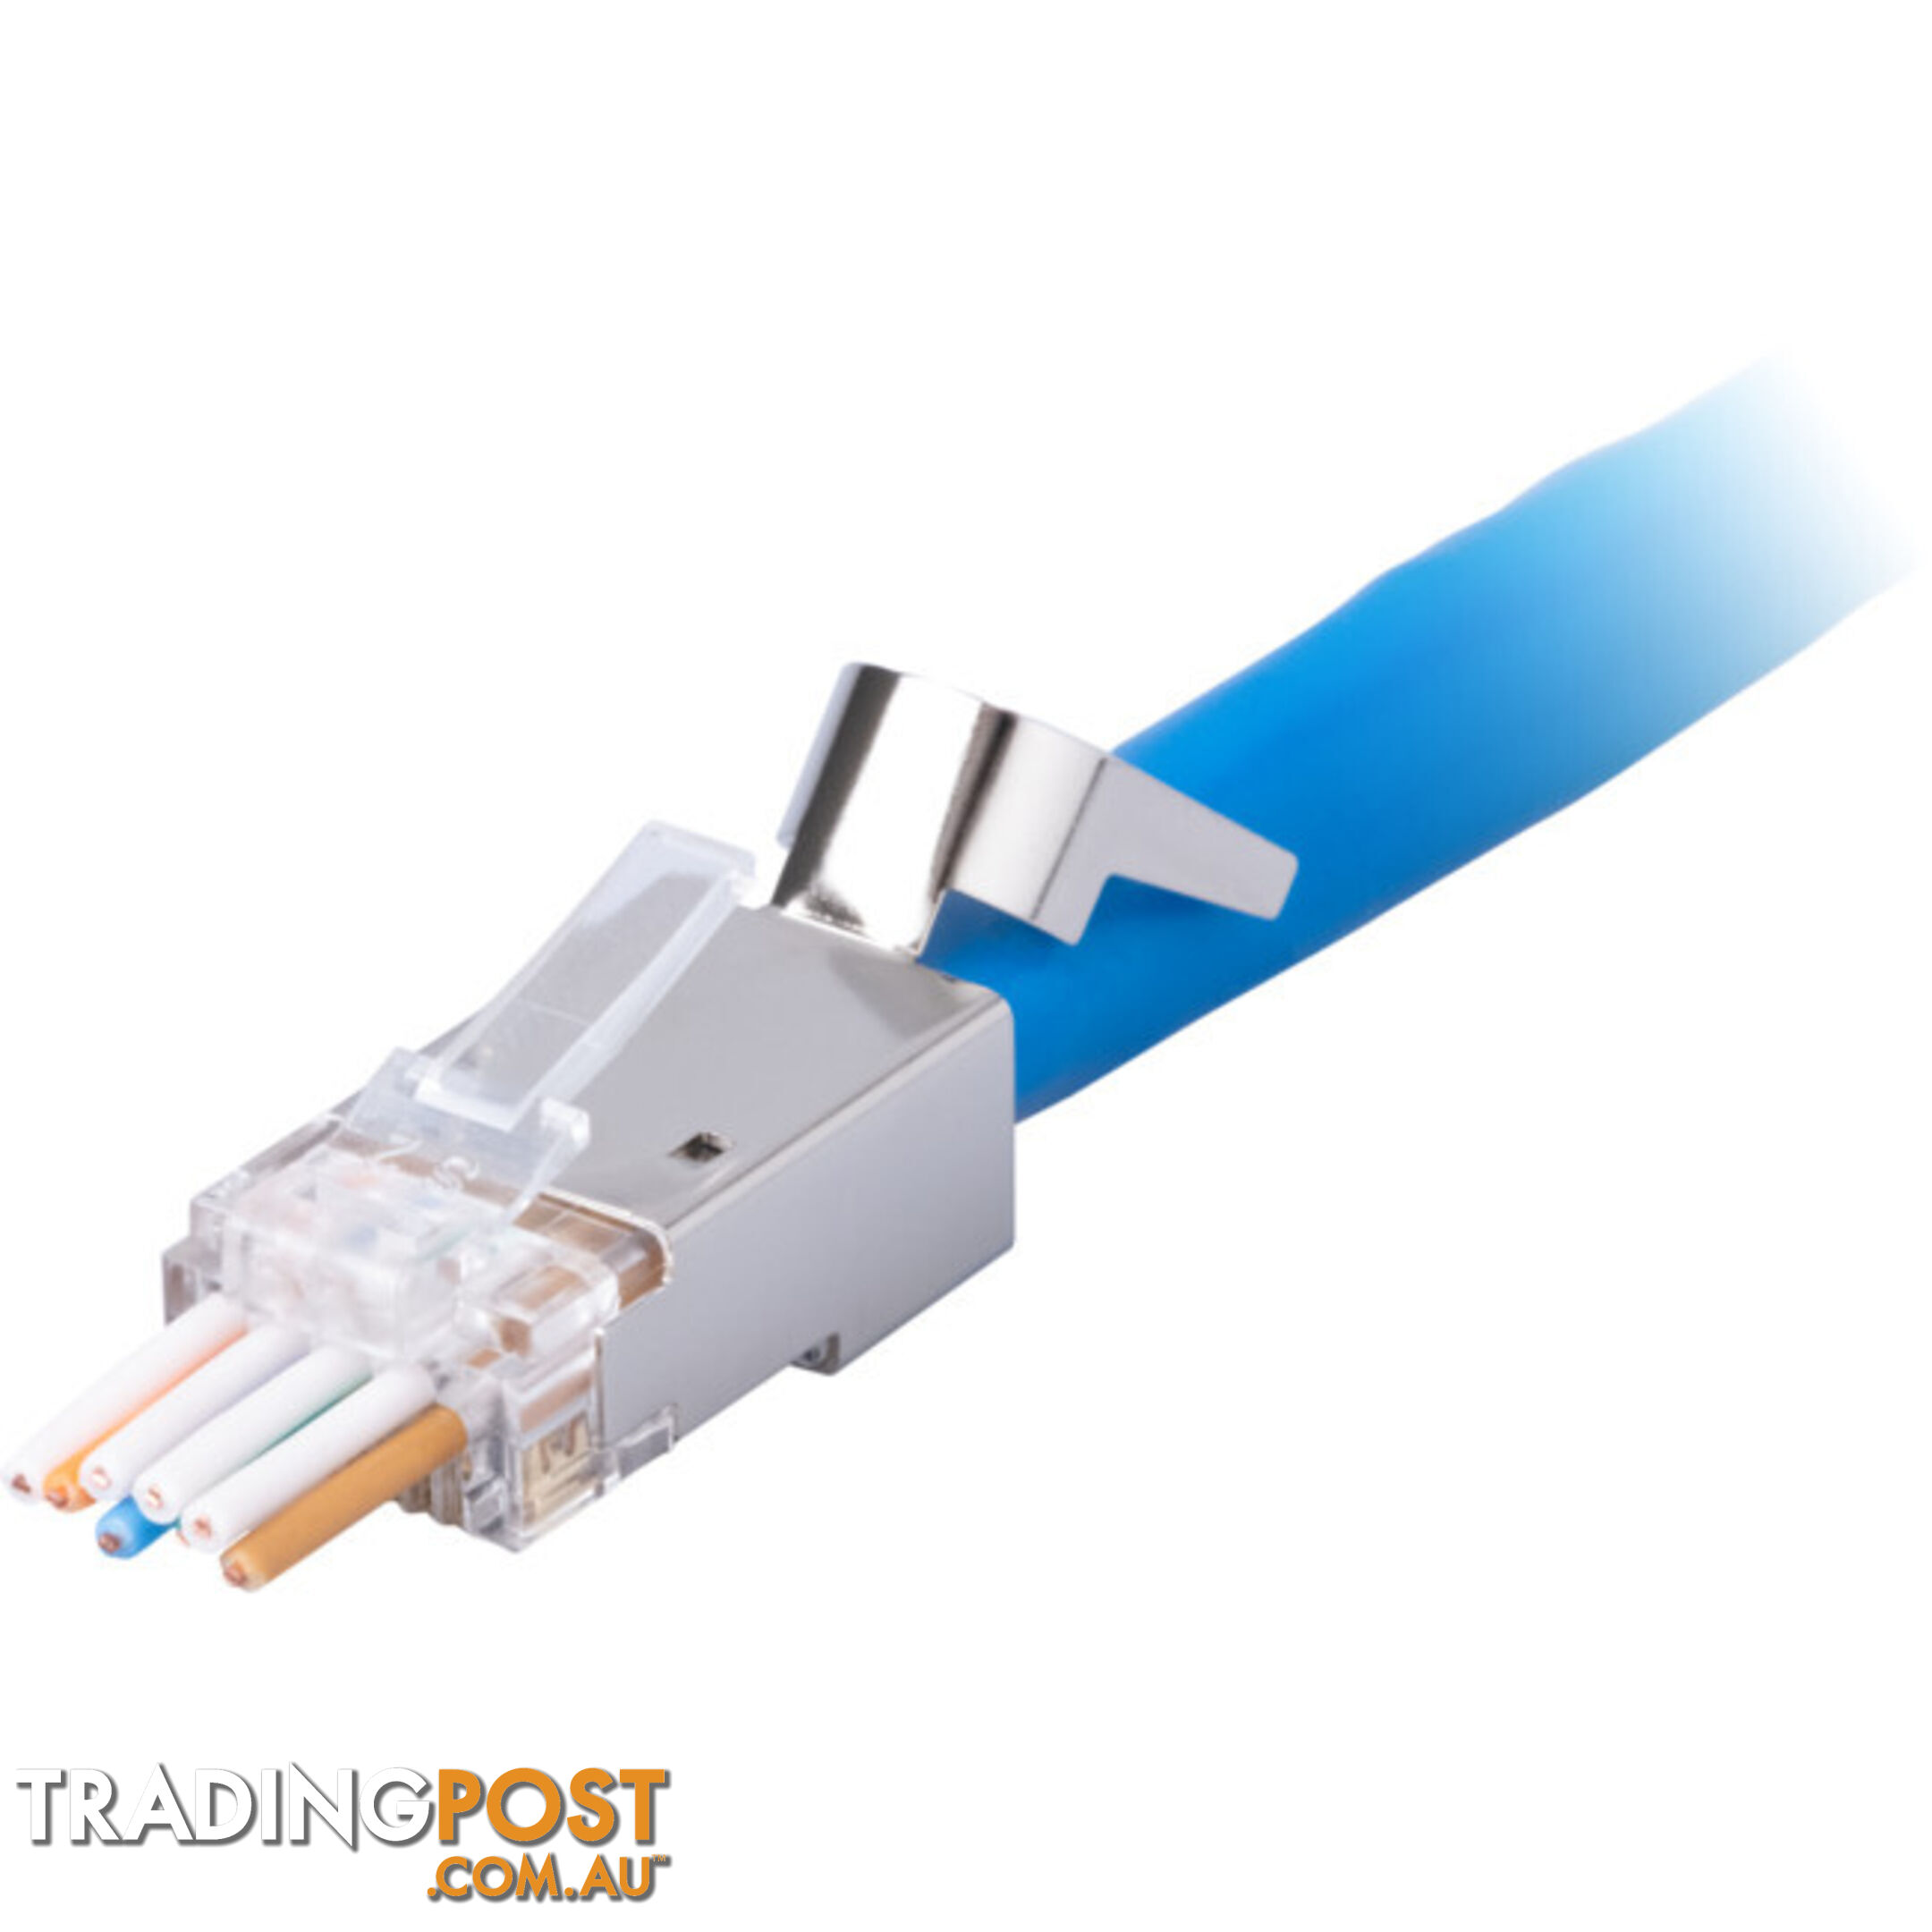 T3SPSC6GS1.35-50 STP RJ45 SHIELDED CAT6 SNAP PLUG WITH COPPER STRIP EXT GROUND 2PC 1.35MM PACK OF 50